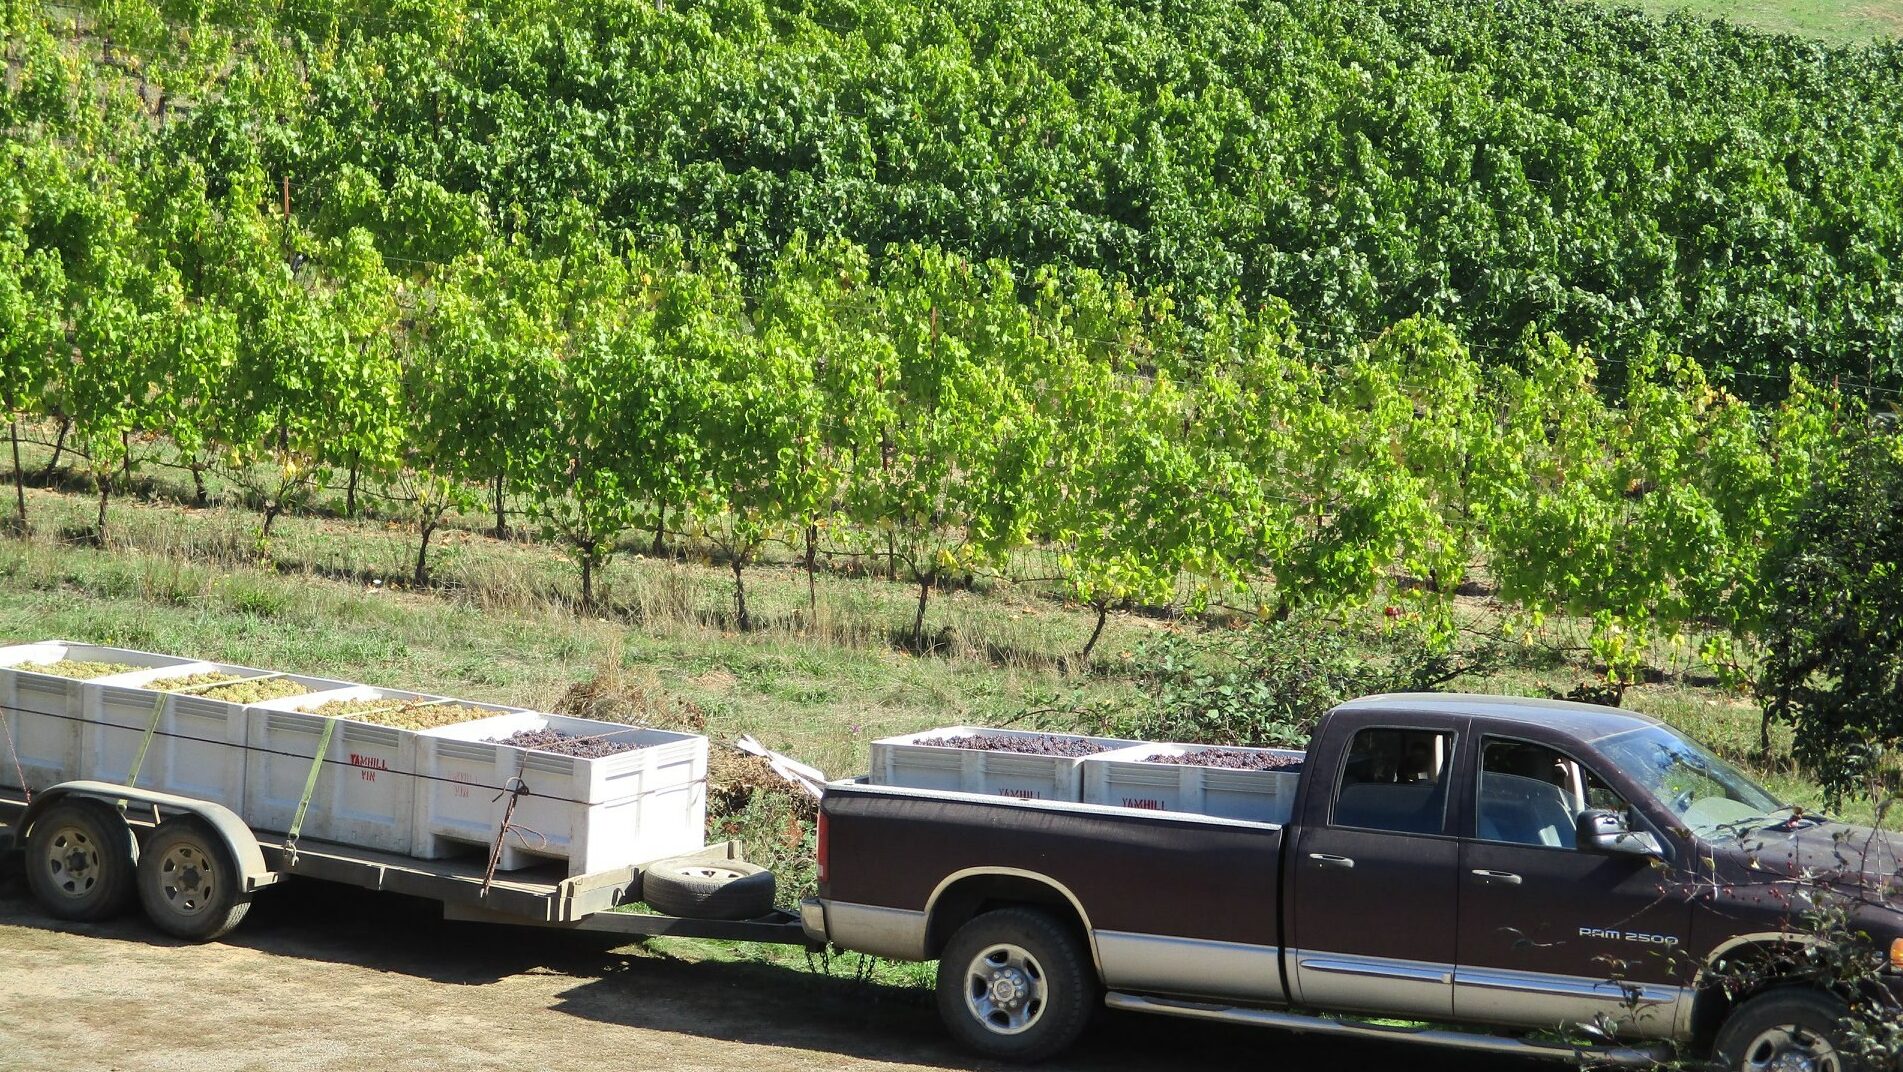 Truck with Trailer in the Yamhill Vineyards